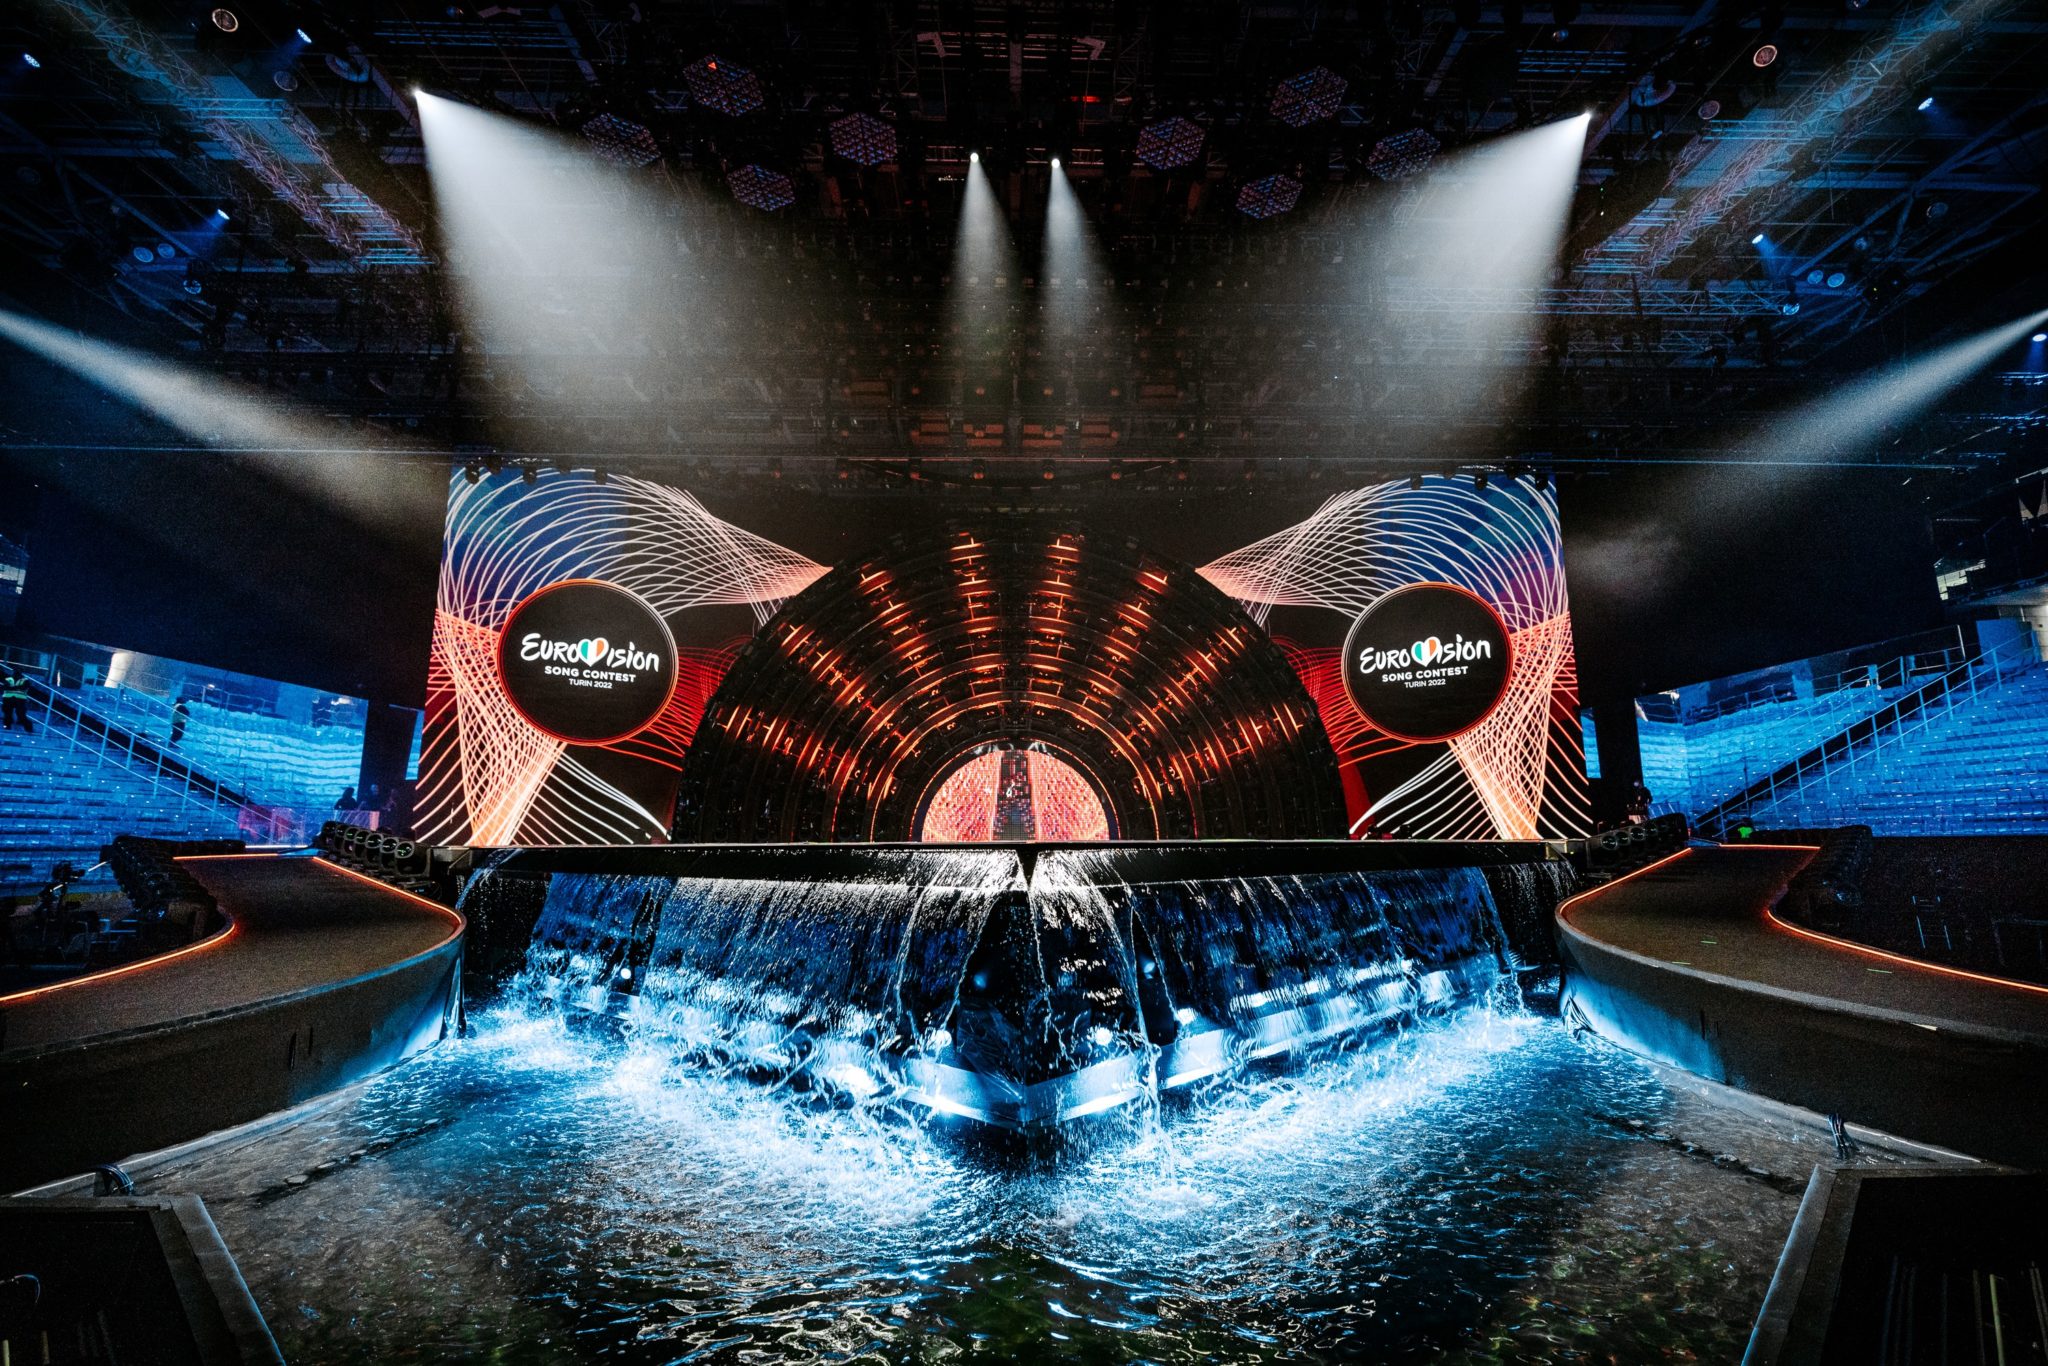 Eurovision stage in Turin, Italy